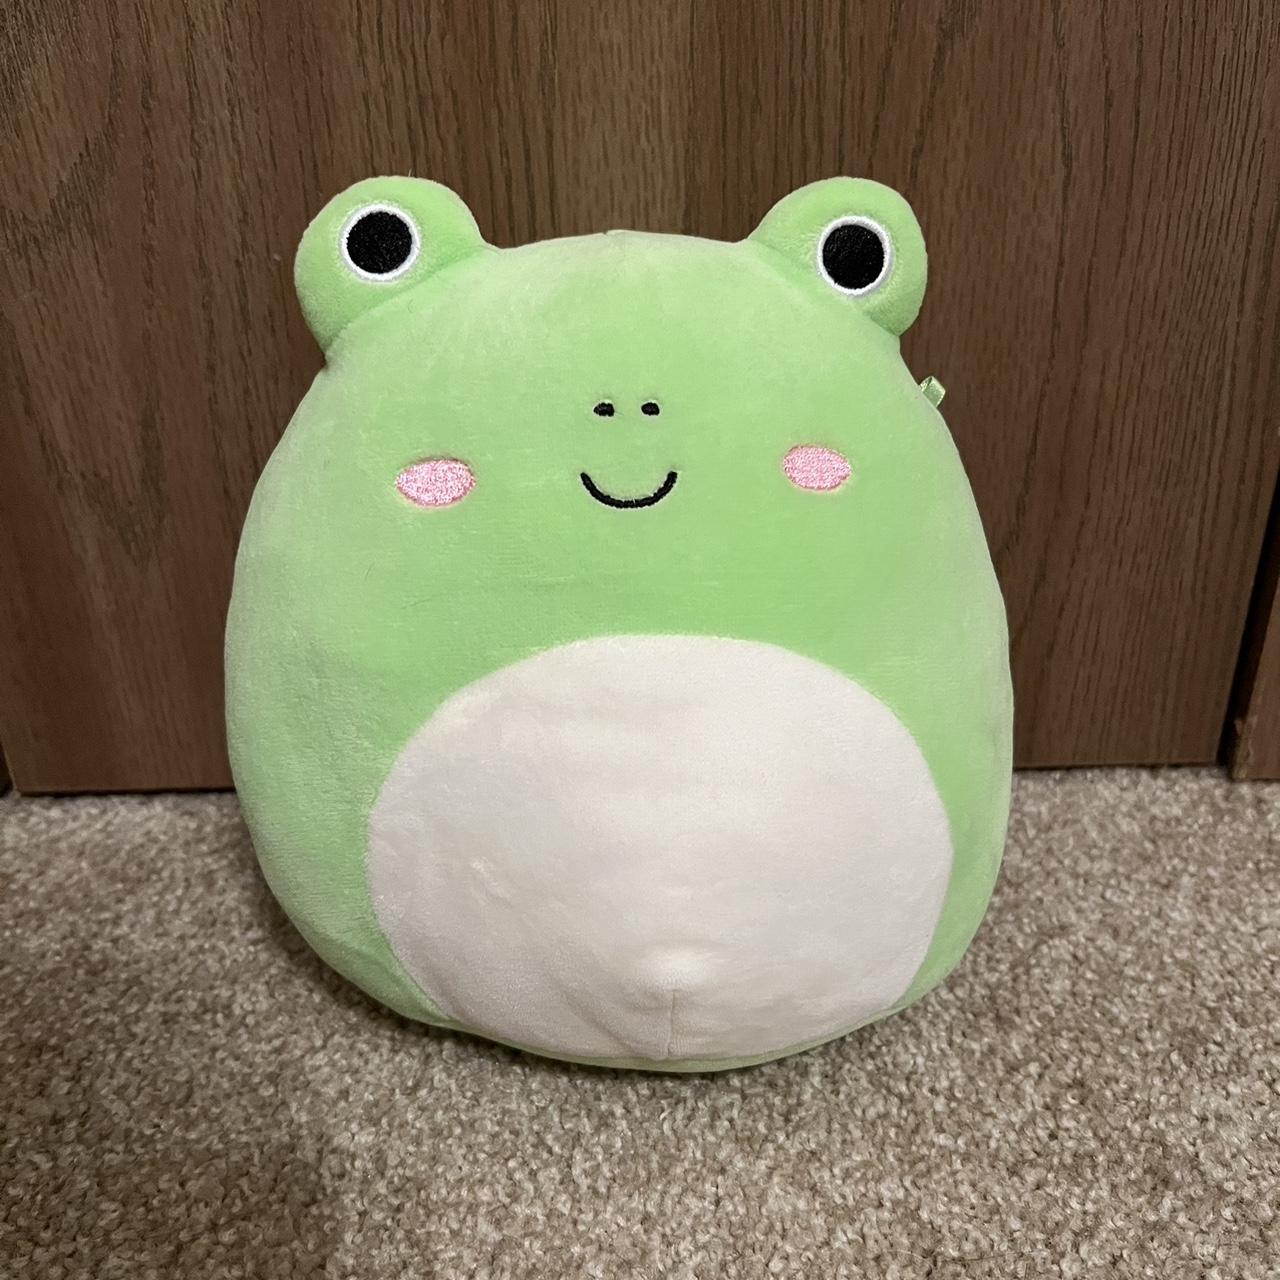 Squishmallow Wendy the Frog -  Canada